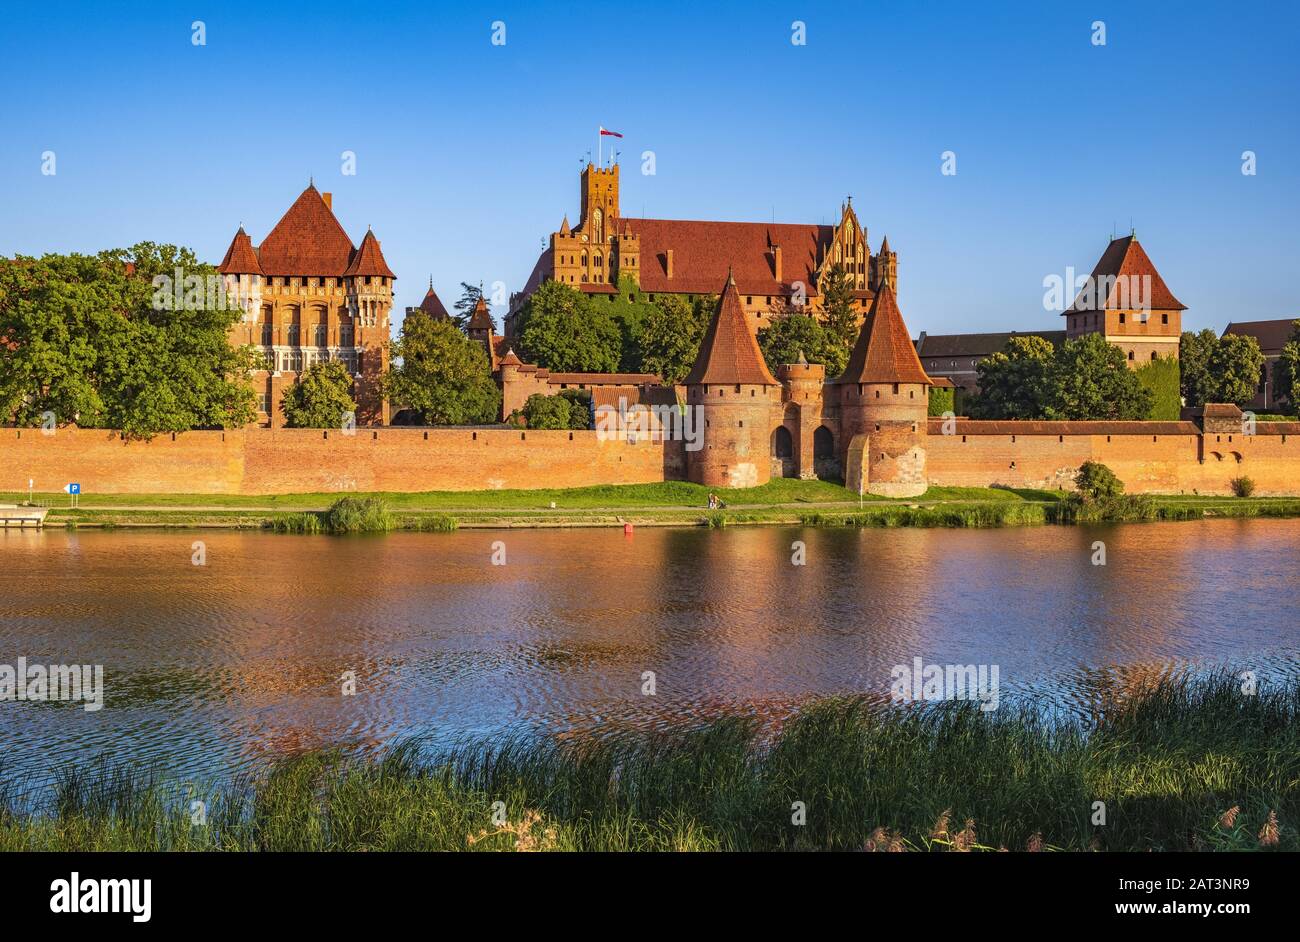 Malbork, Pomerania / Poland - 2019/08/24: Panoramic view of the defense walls and towers of the Medieval Teutonic Order Castle in Malbork, Poland from across the Nogat river Stock Photo